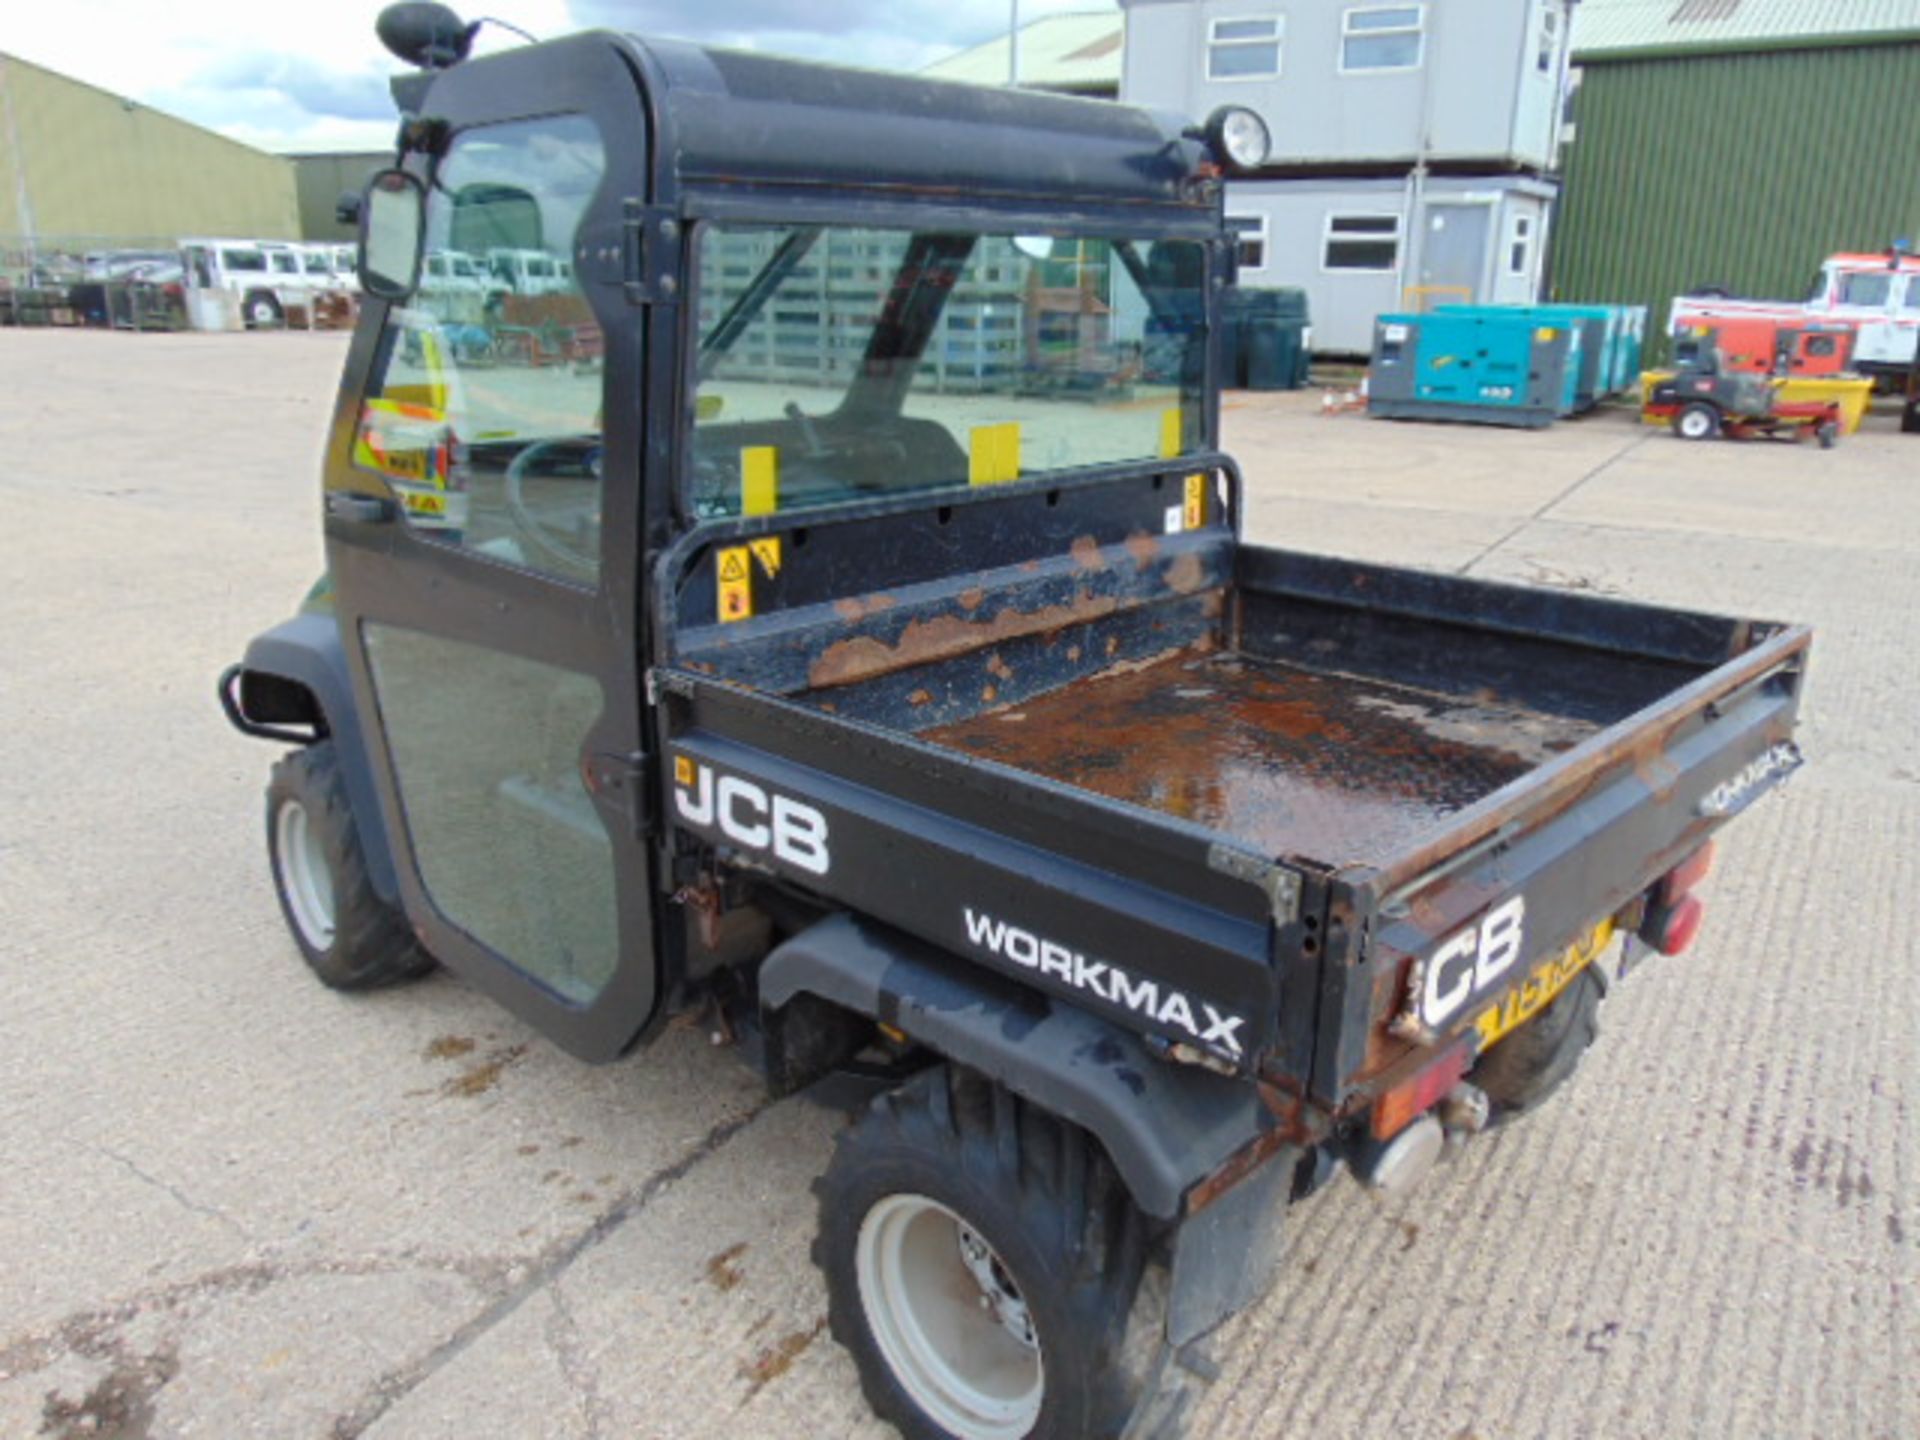 2015 JCB Workmax 1000D 4WD Diesel with rear tipping body and power steering 838 hours ONLY - Image 5 of 11